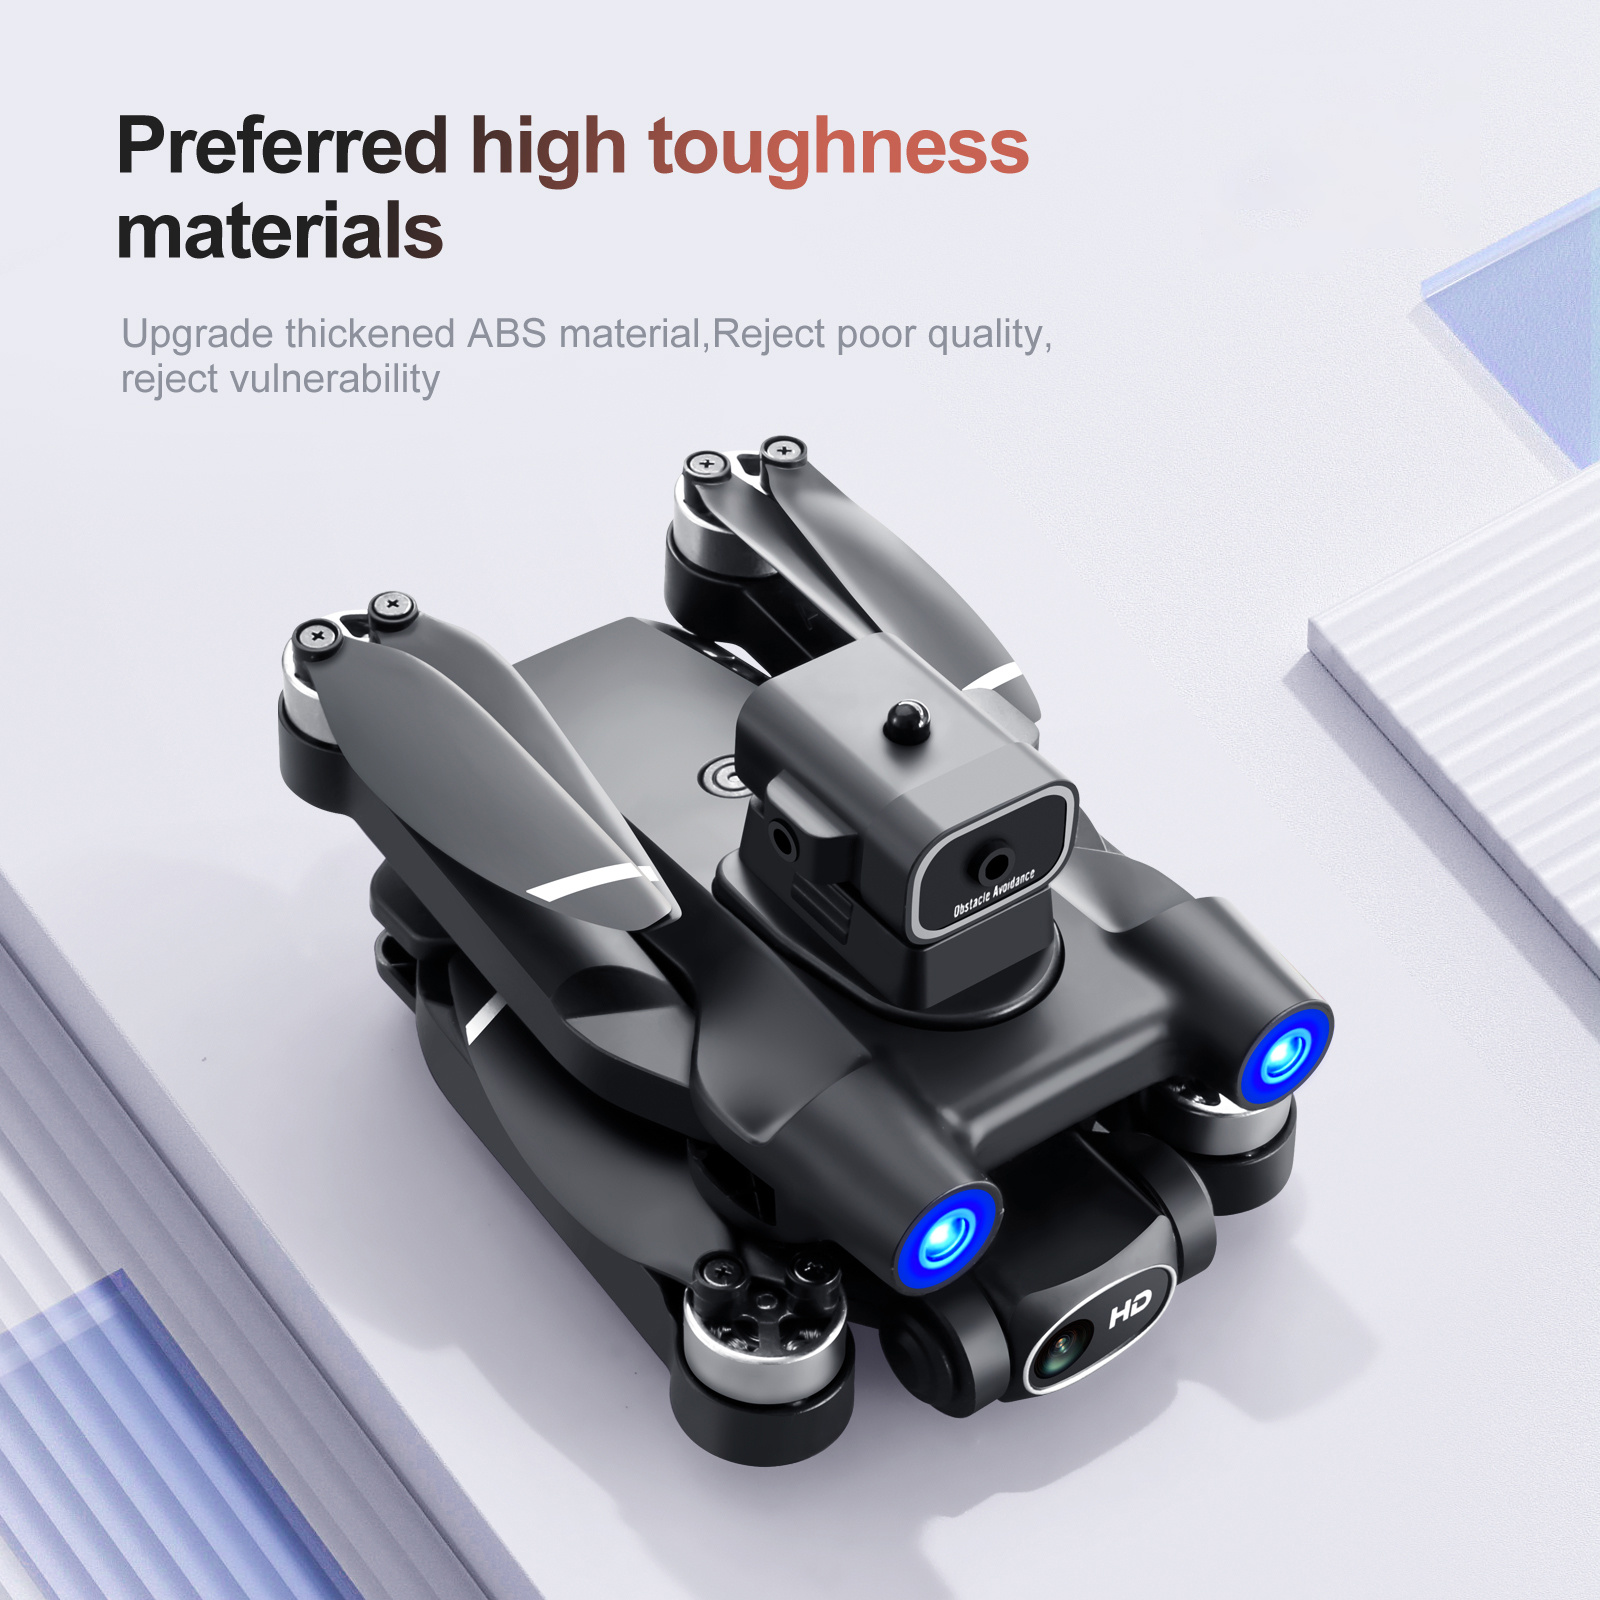 gps positioning drone with brushless motor headless mode intelligent obstacle avoidance optical flow positioning a key return ultra long range intelligent following strong wind resistance details 5